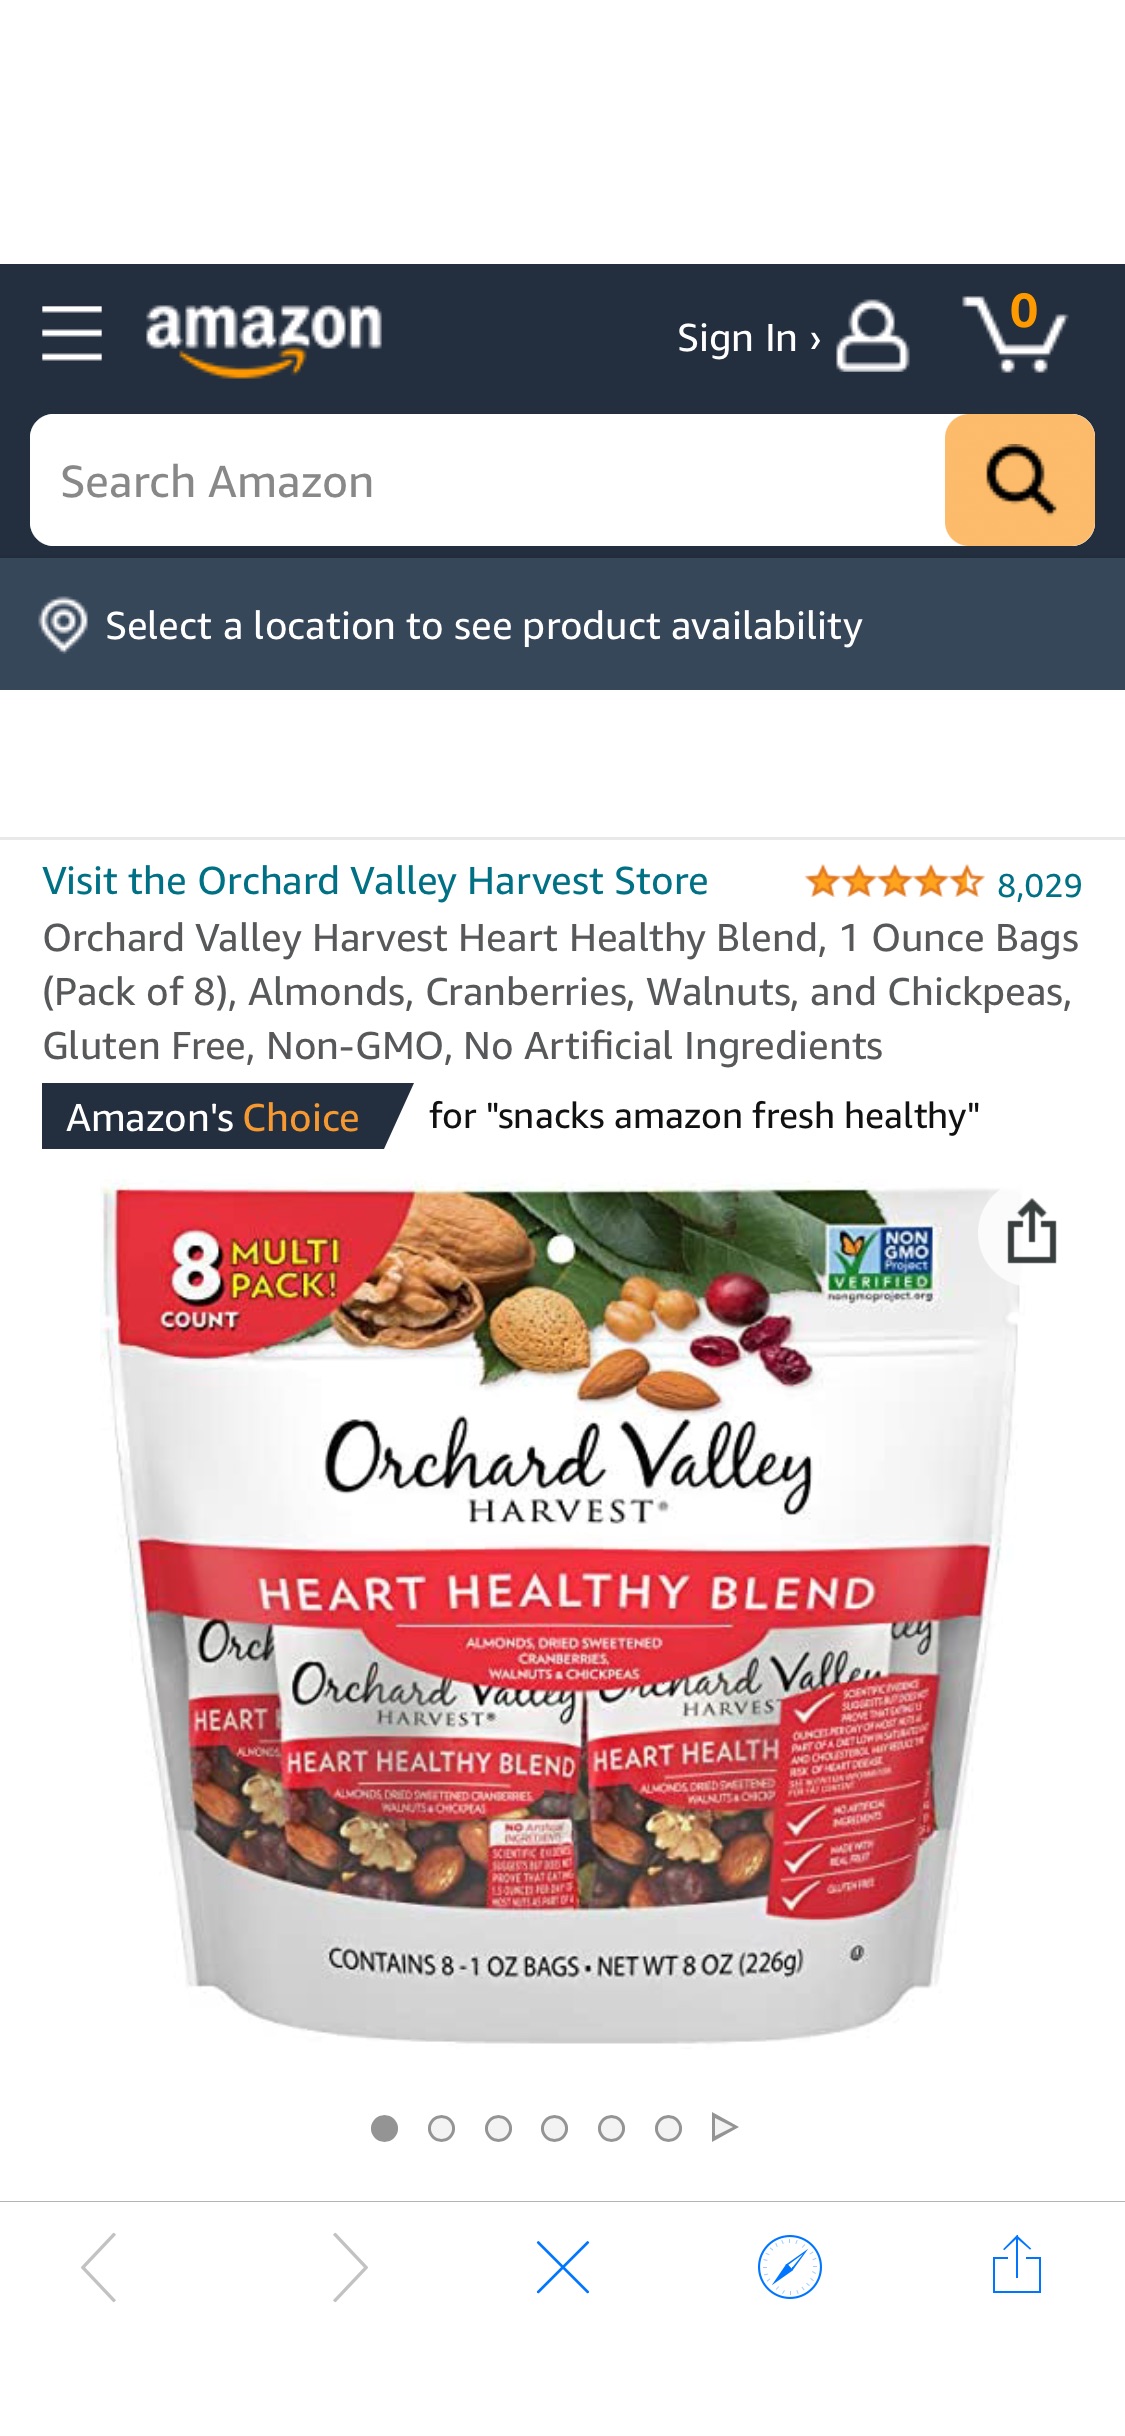 Amazon.com : Orchard Valley Harvest Heart Healthy Blend, 1 Ounce Bags (Pack of 8), Almonds, Cranberries, Walnuts, and Chickpeas, Gluten Free, Non-GMO, No 坚果果干